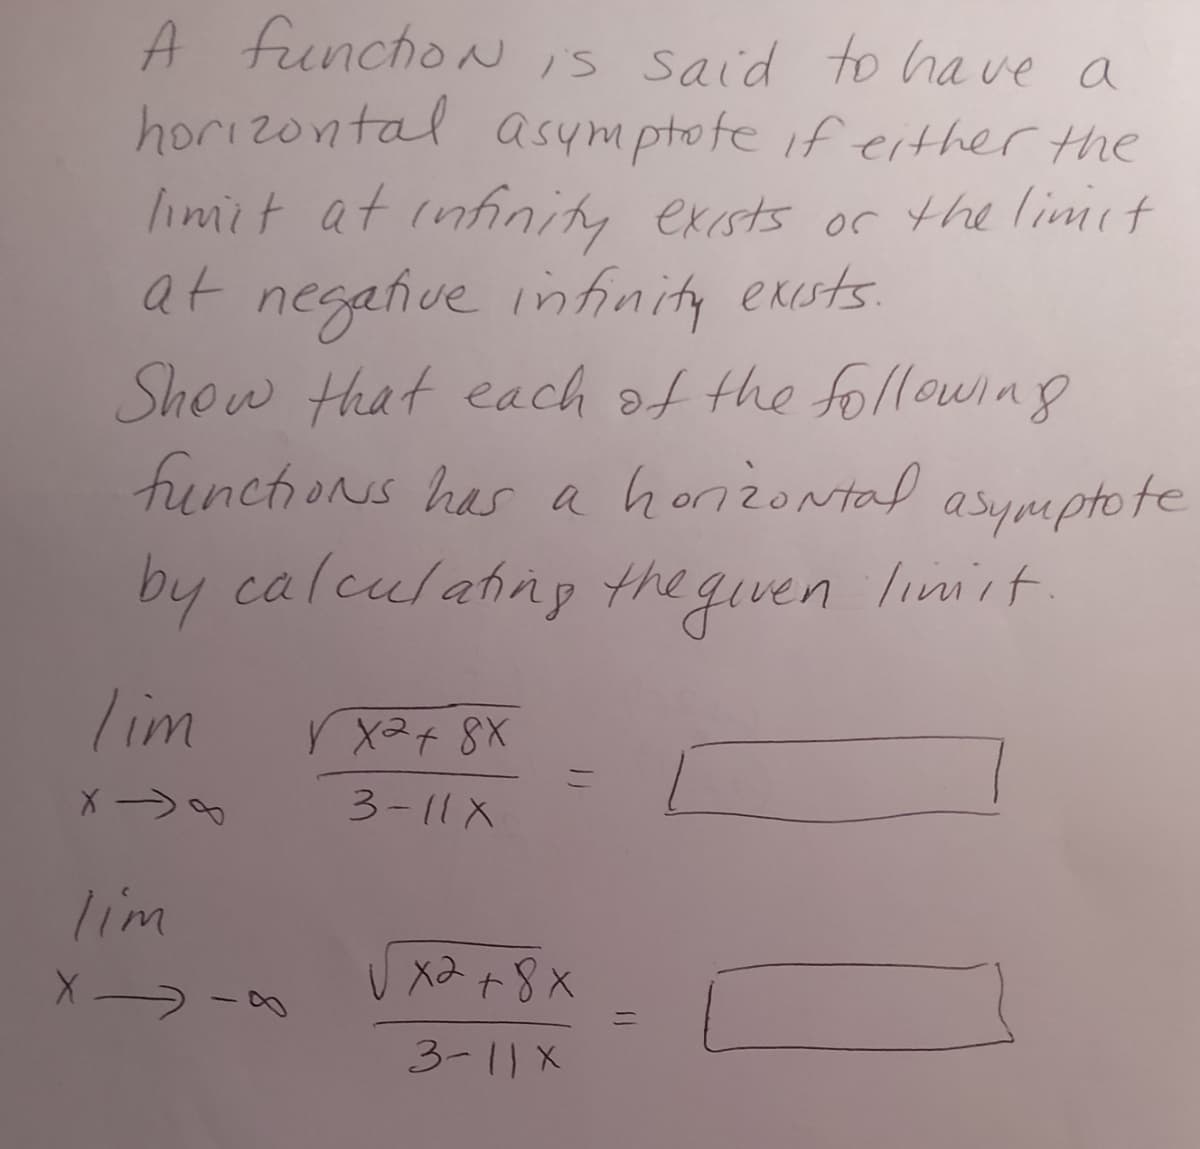 A function is said to have a
horizontal asymptote if either the
limit at infinity exists of the limit
at negative infinity exists.
Show that each of the following
functions has a horizontal
asymptote
by calculating the given limit
Tim
V x2 + 8X
=
X->
3-11X
lim
XIA
ха
x2 + 8x
3-11 X
=